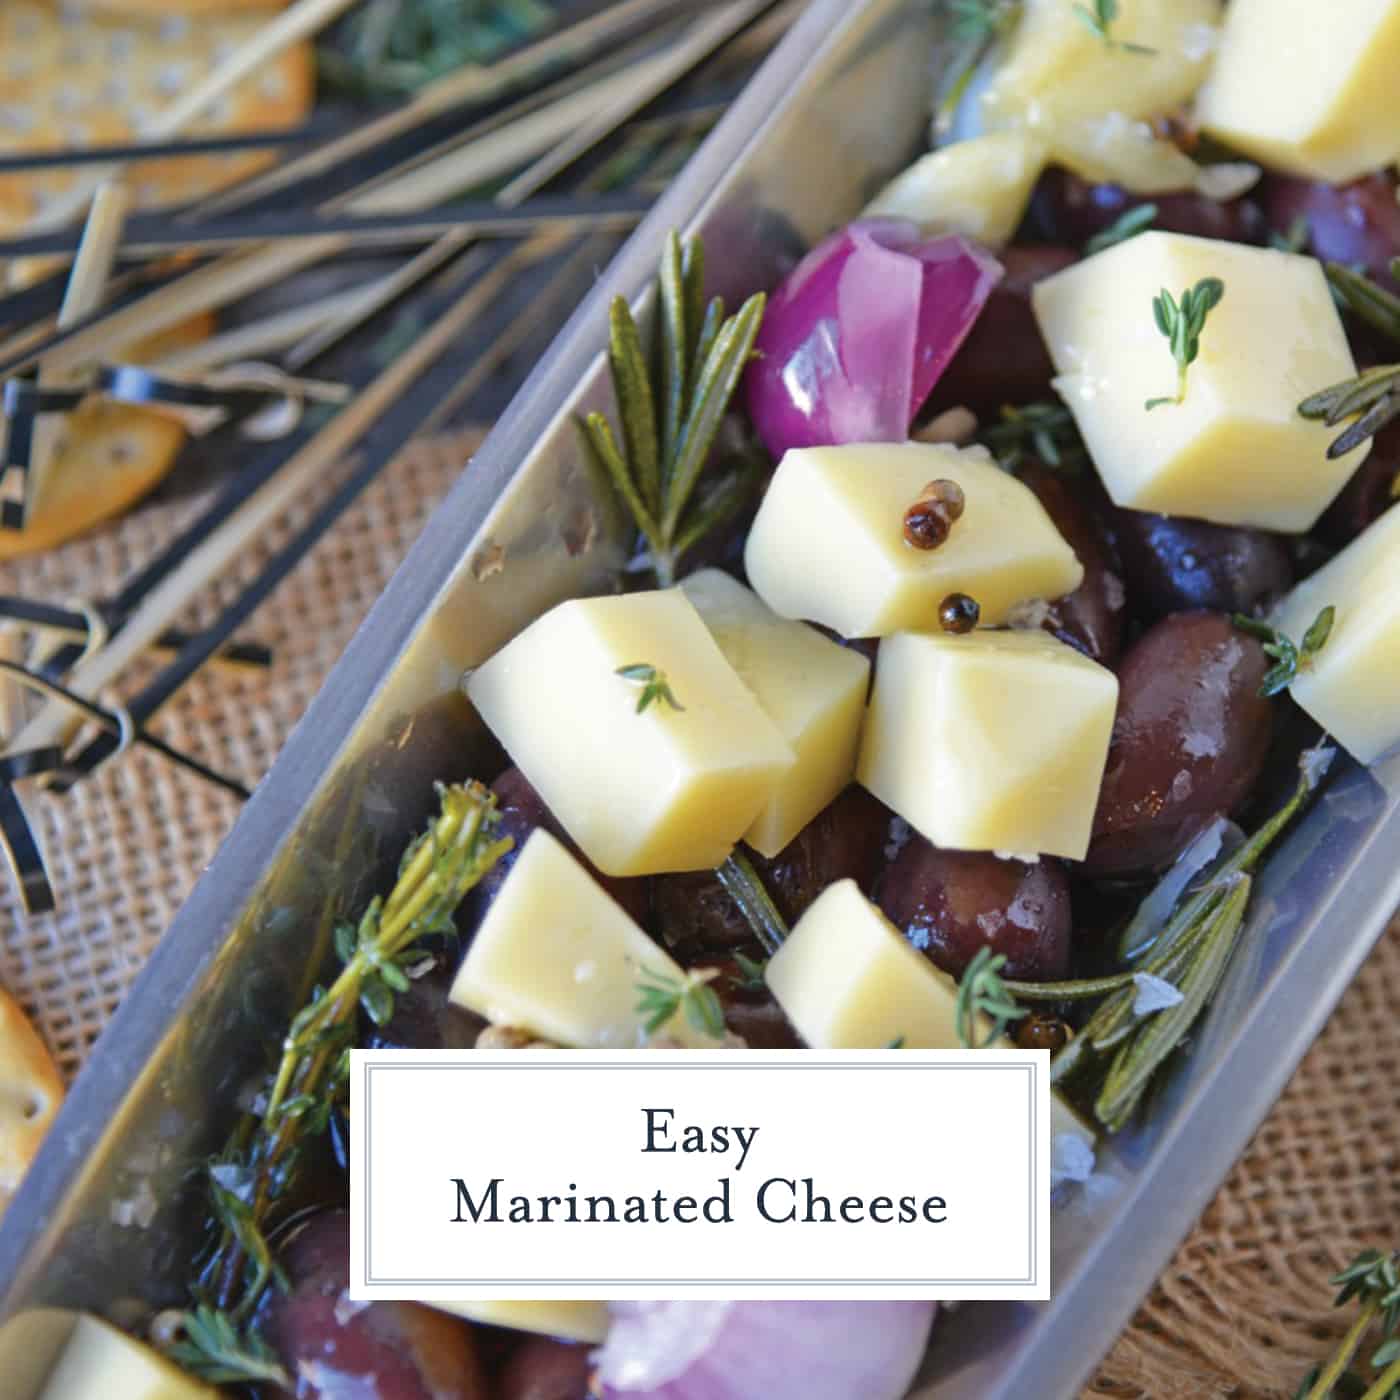 Marinated Cheese is the perfect hostess or homemade holiday gift. Simple and tasty, it also makes an easy party appetizer! #marinatedcheese #easypartyappetizers #homemadegifts www.savoryexperiments.com 